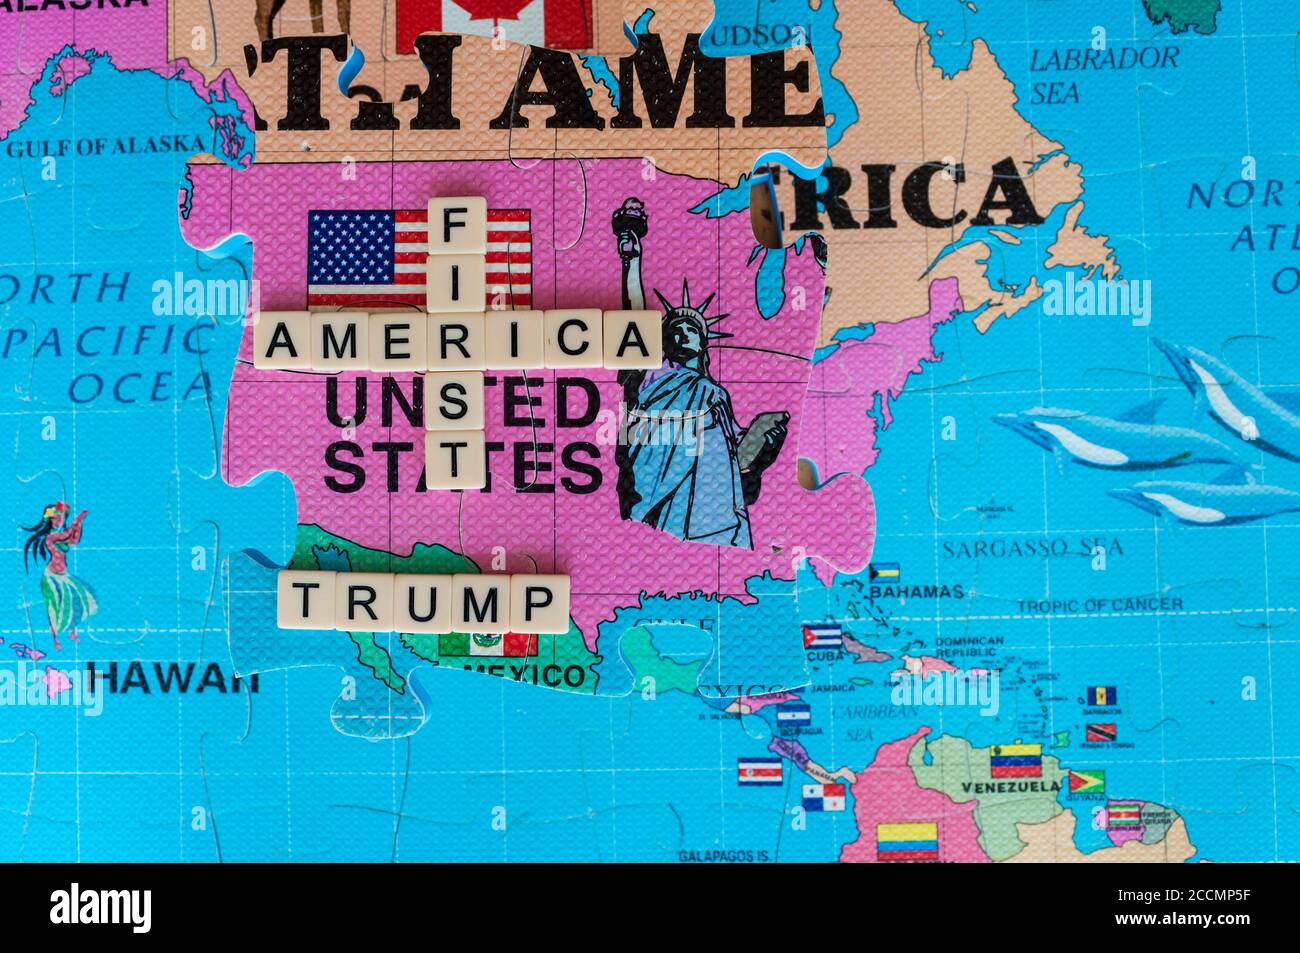 America first, in words and images on a 3D world map puzzle. An iconic image of  Trump's  approach to geopolitics. Popular right-wing stance in USA. Stock Photo